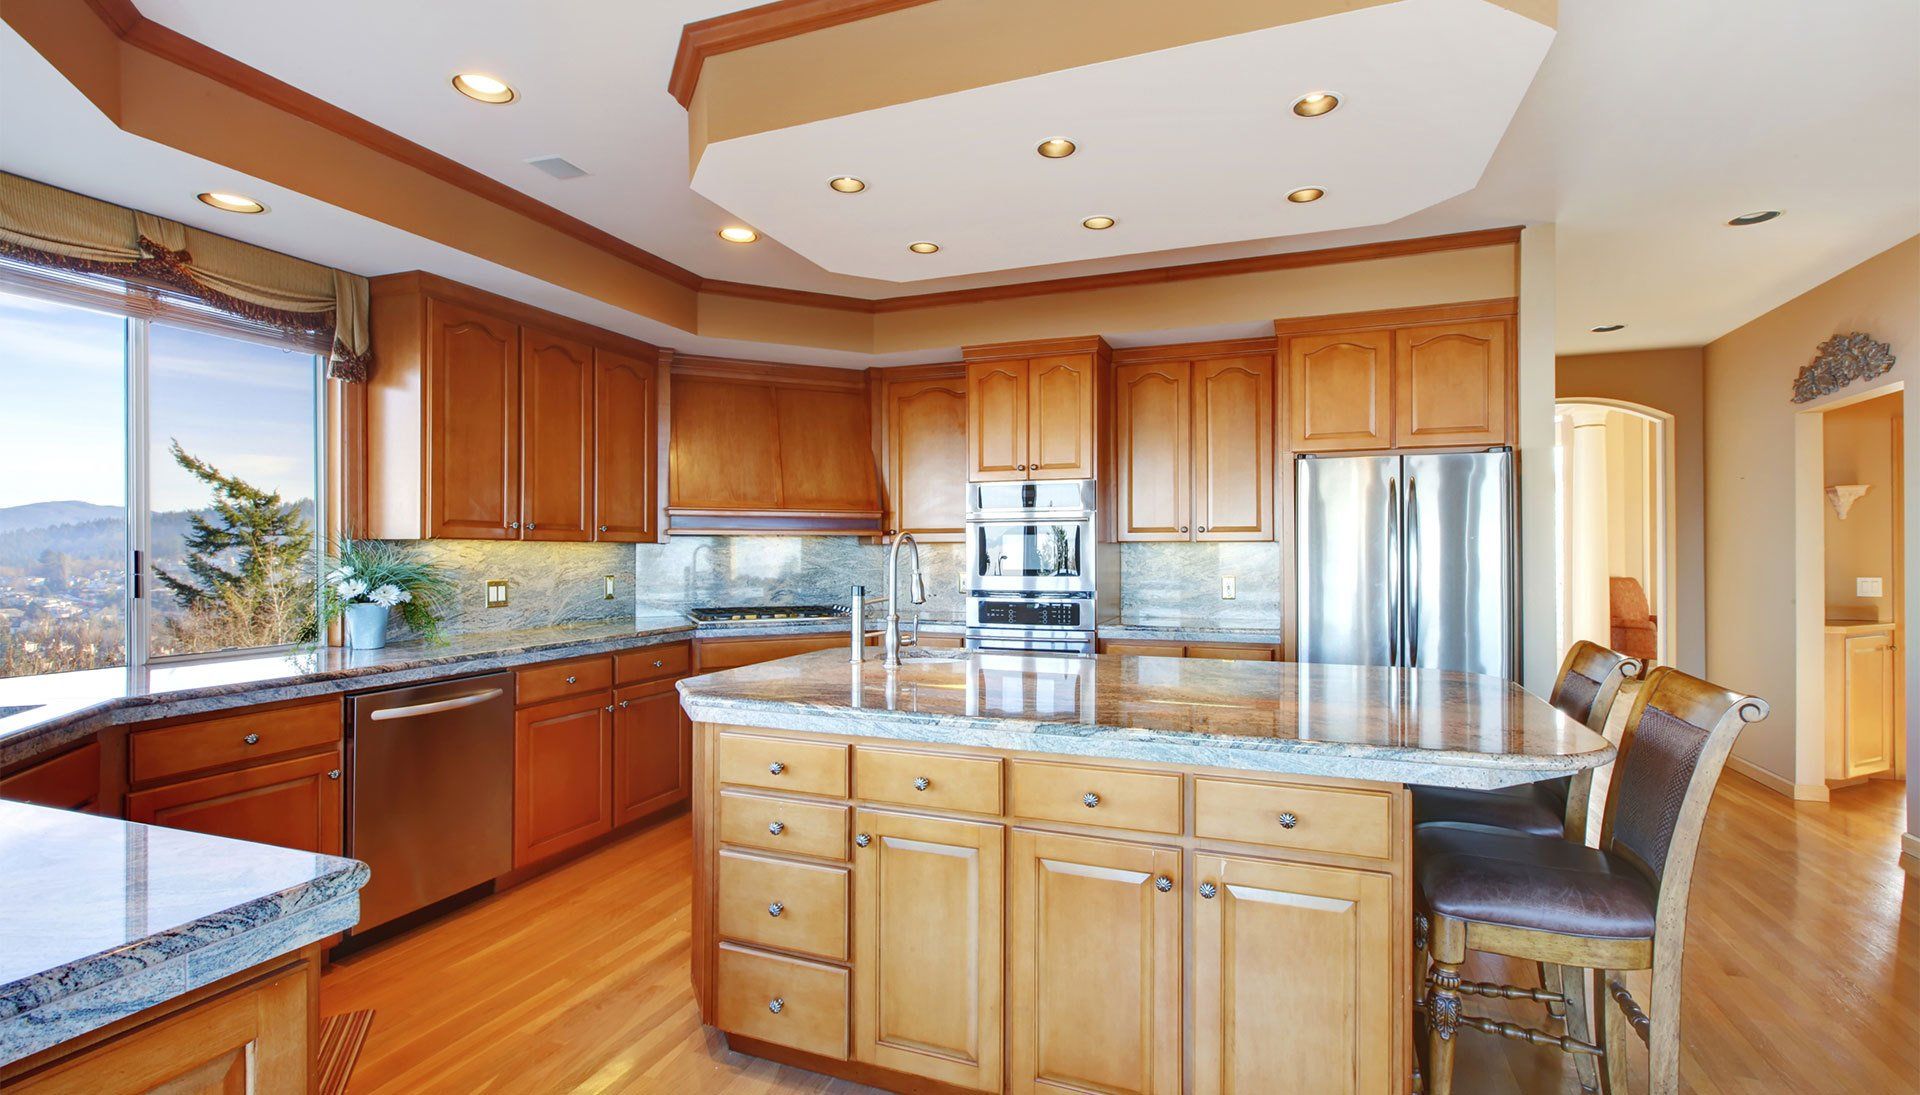 Custom Cabinetry in Kitchen